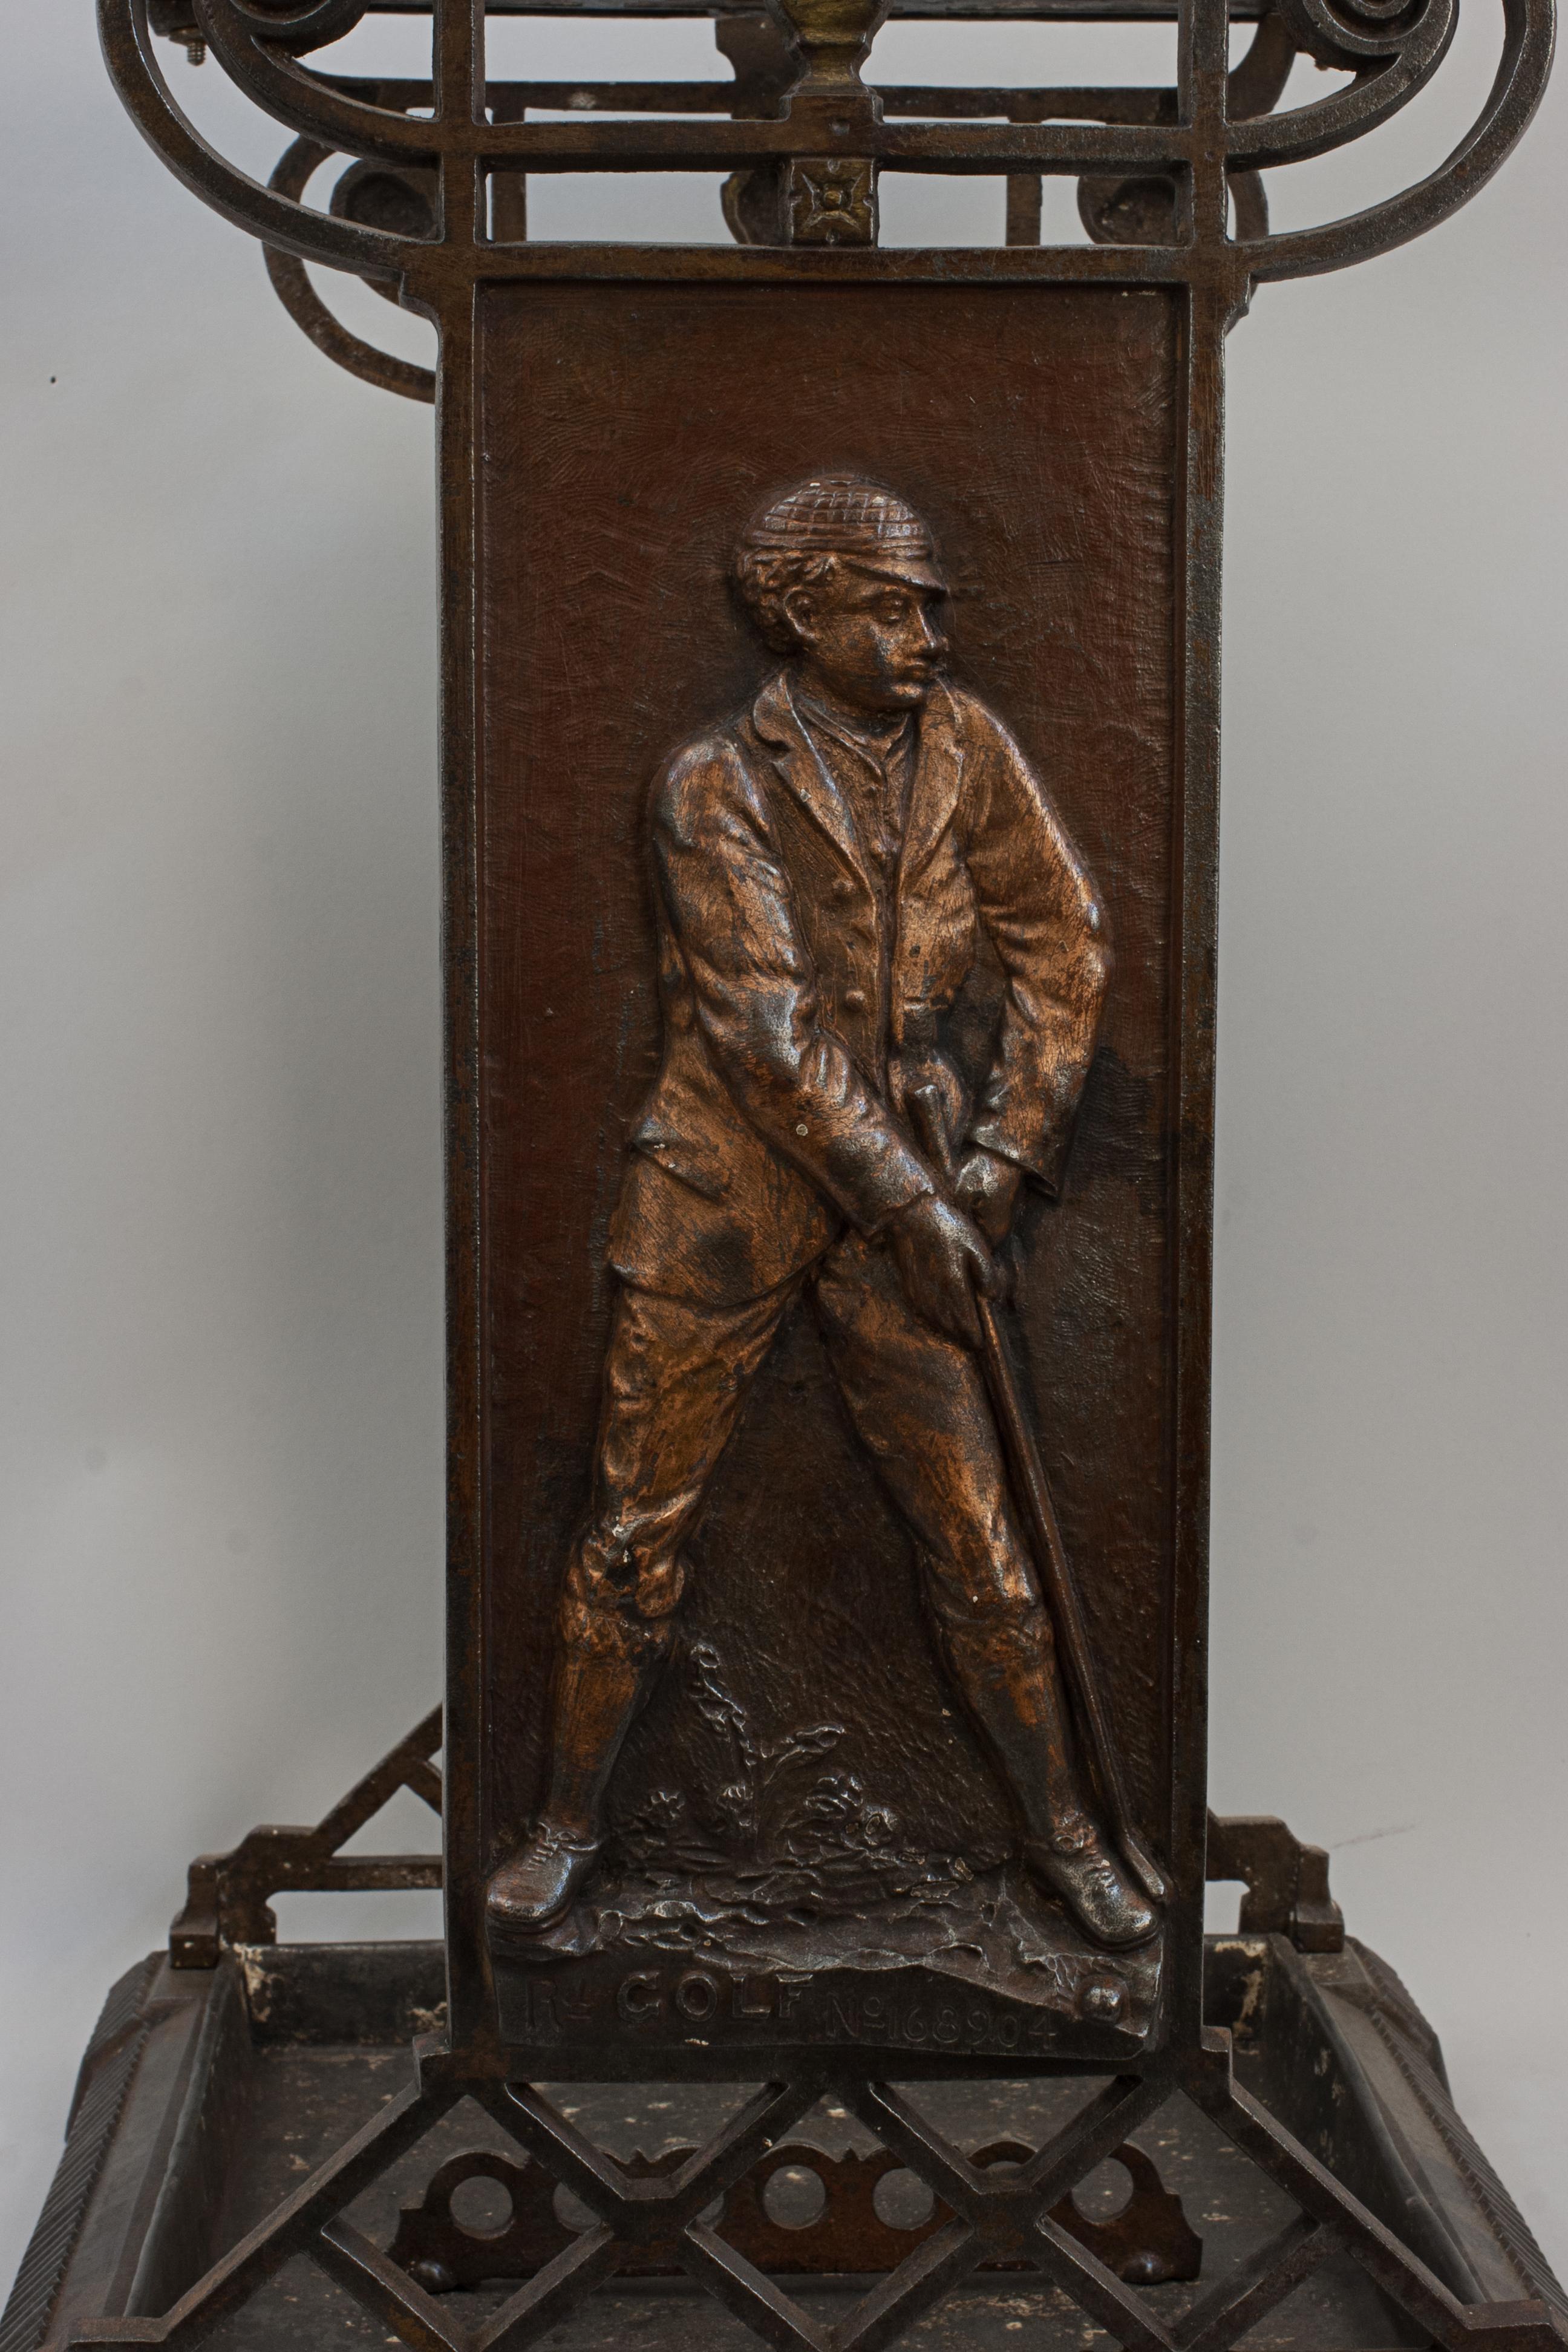 Cast Iron Umbrella Stand With Golf Figure For Sale 9